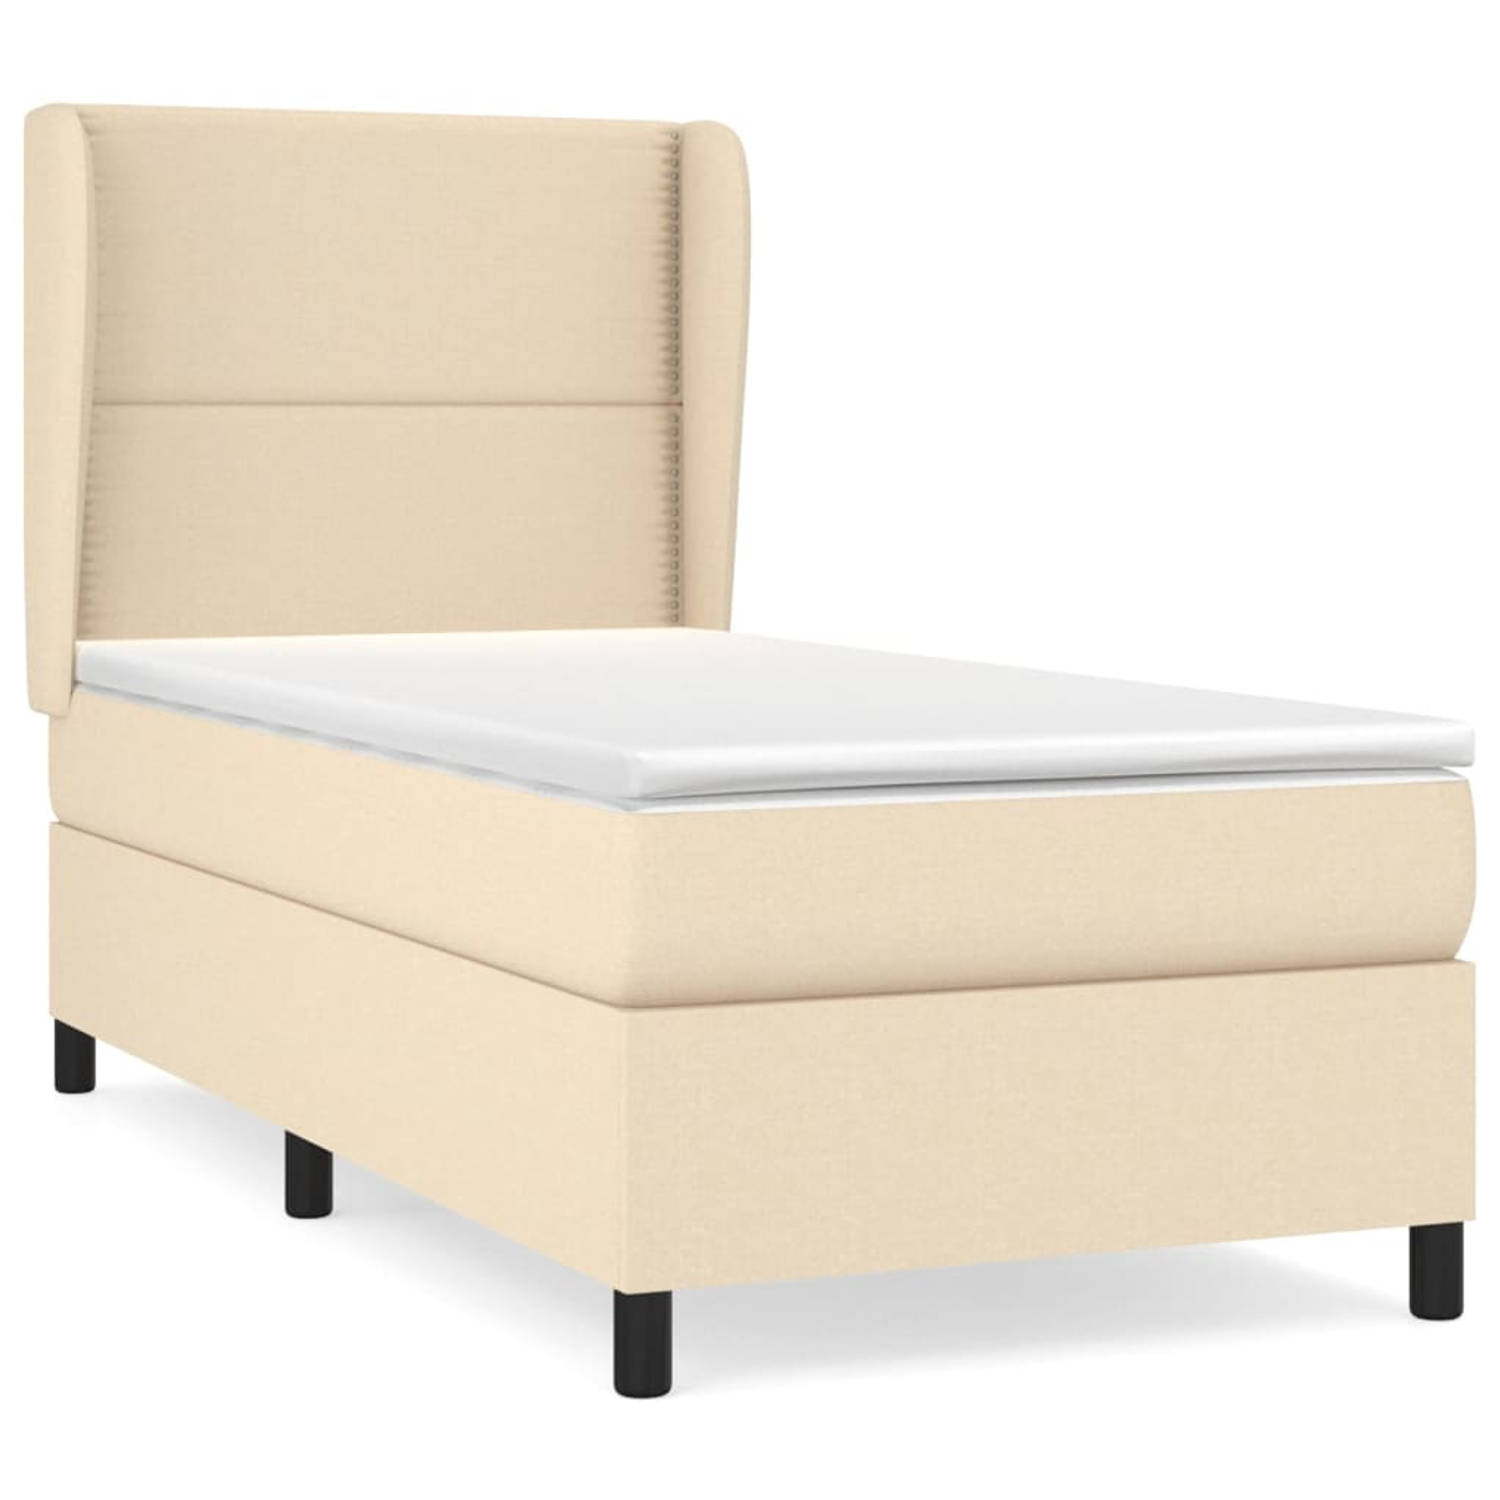 The Living Store Boxspringbed - - Bed - 203 x 93 x 118/128 cm - Crème